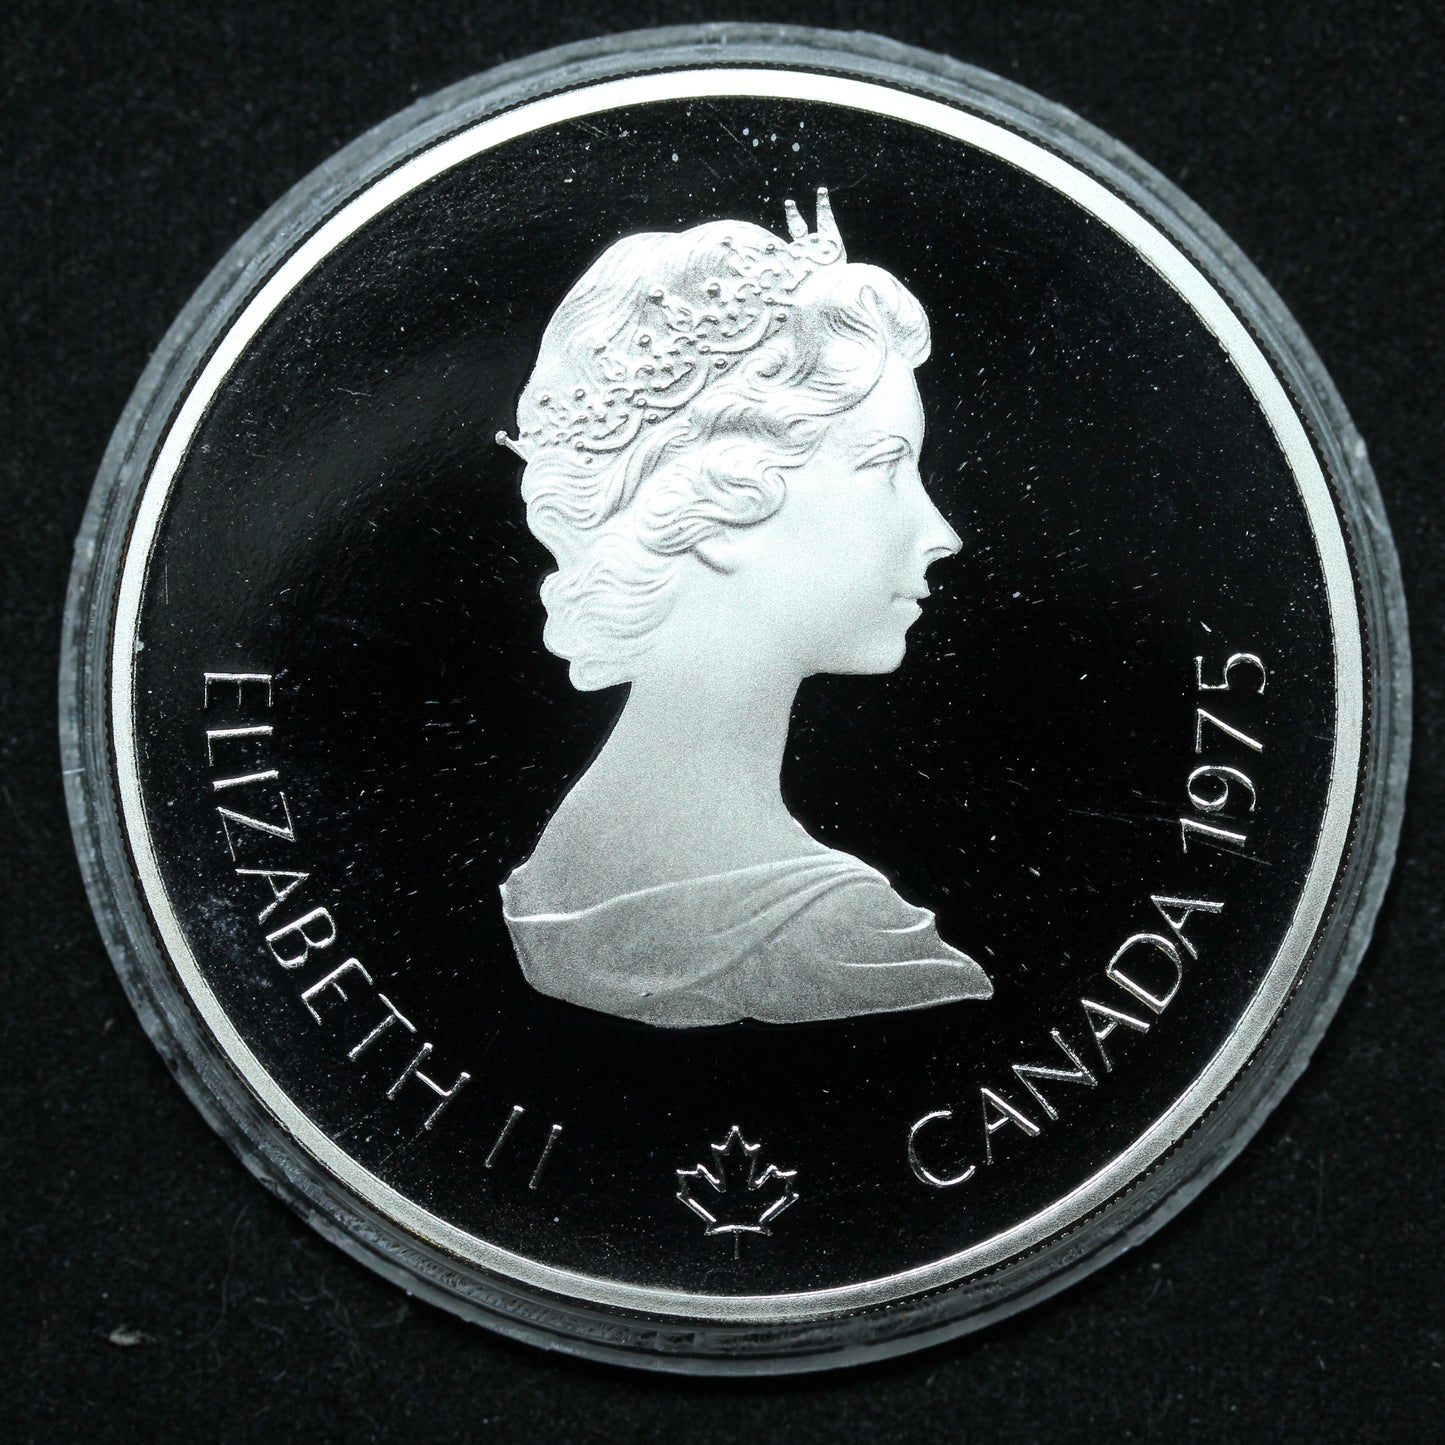 1975 Canada 10 Dollar Sailing 1976 Montreal Olympics Proof Sterling Coin